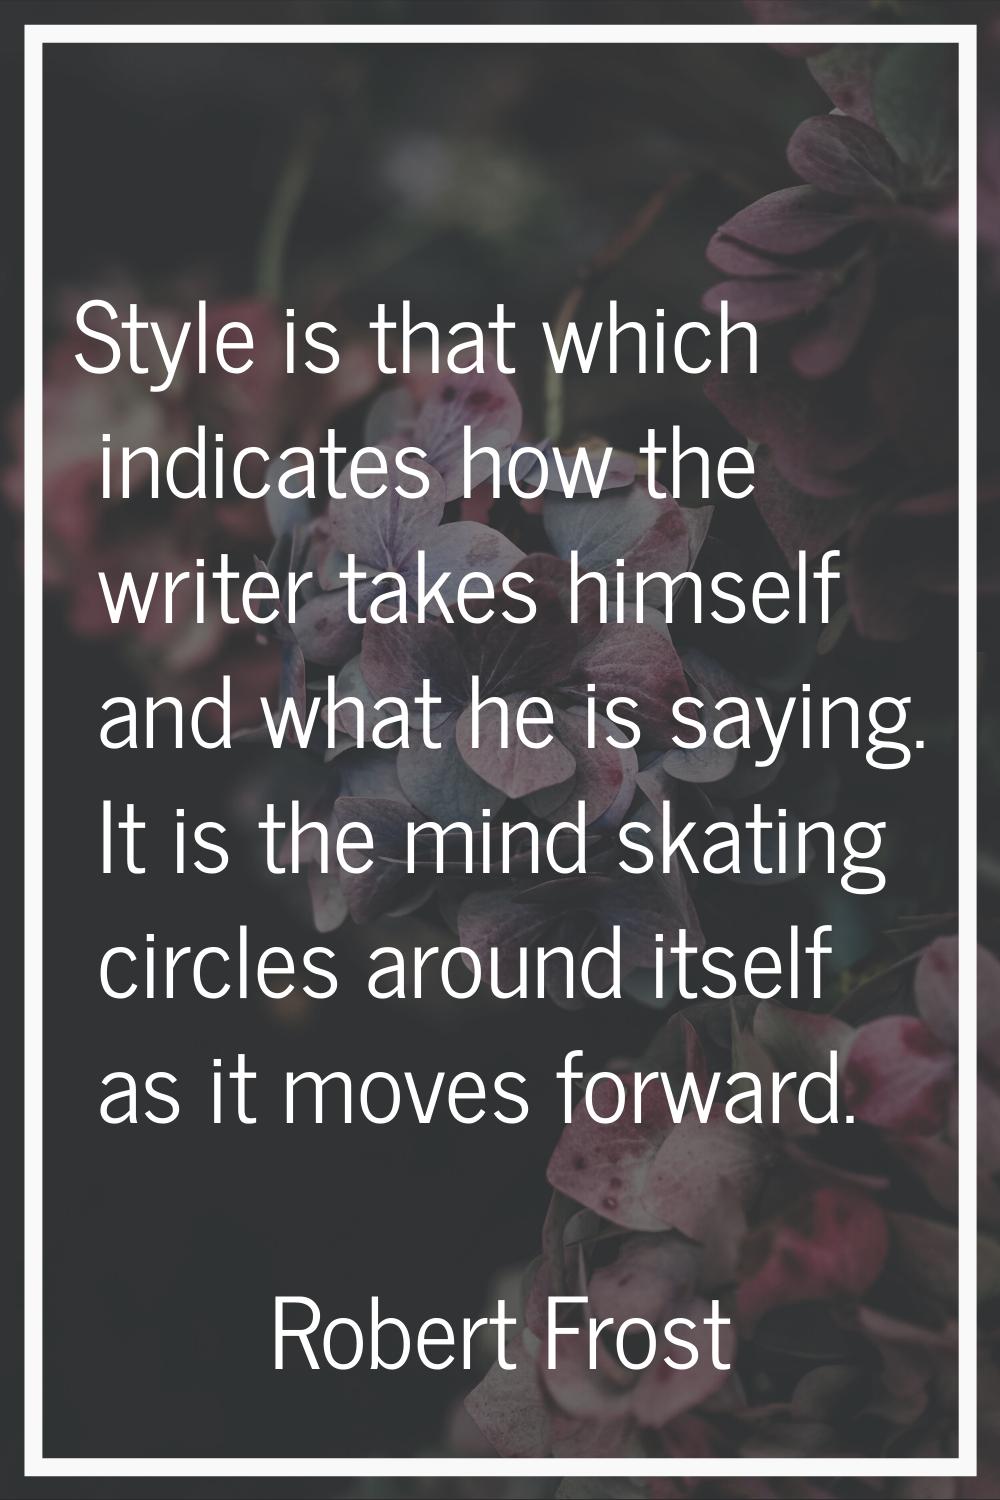 Style is that which indicates how the writer takes himself and what he is saying. It is the mind sk